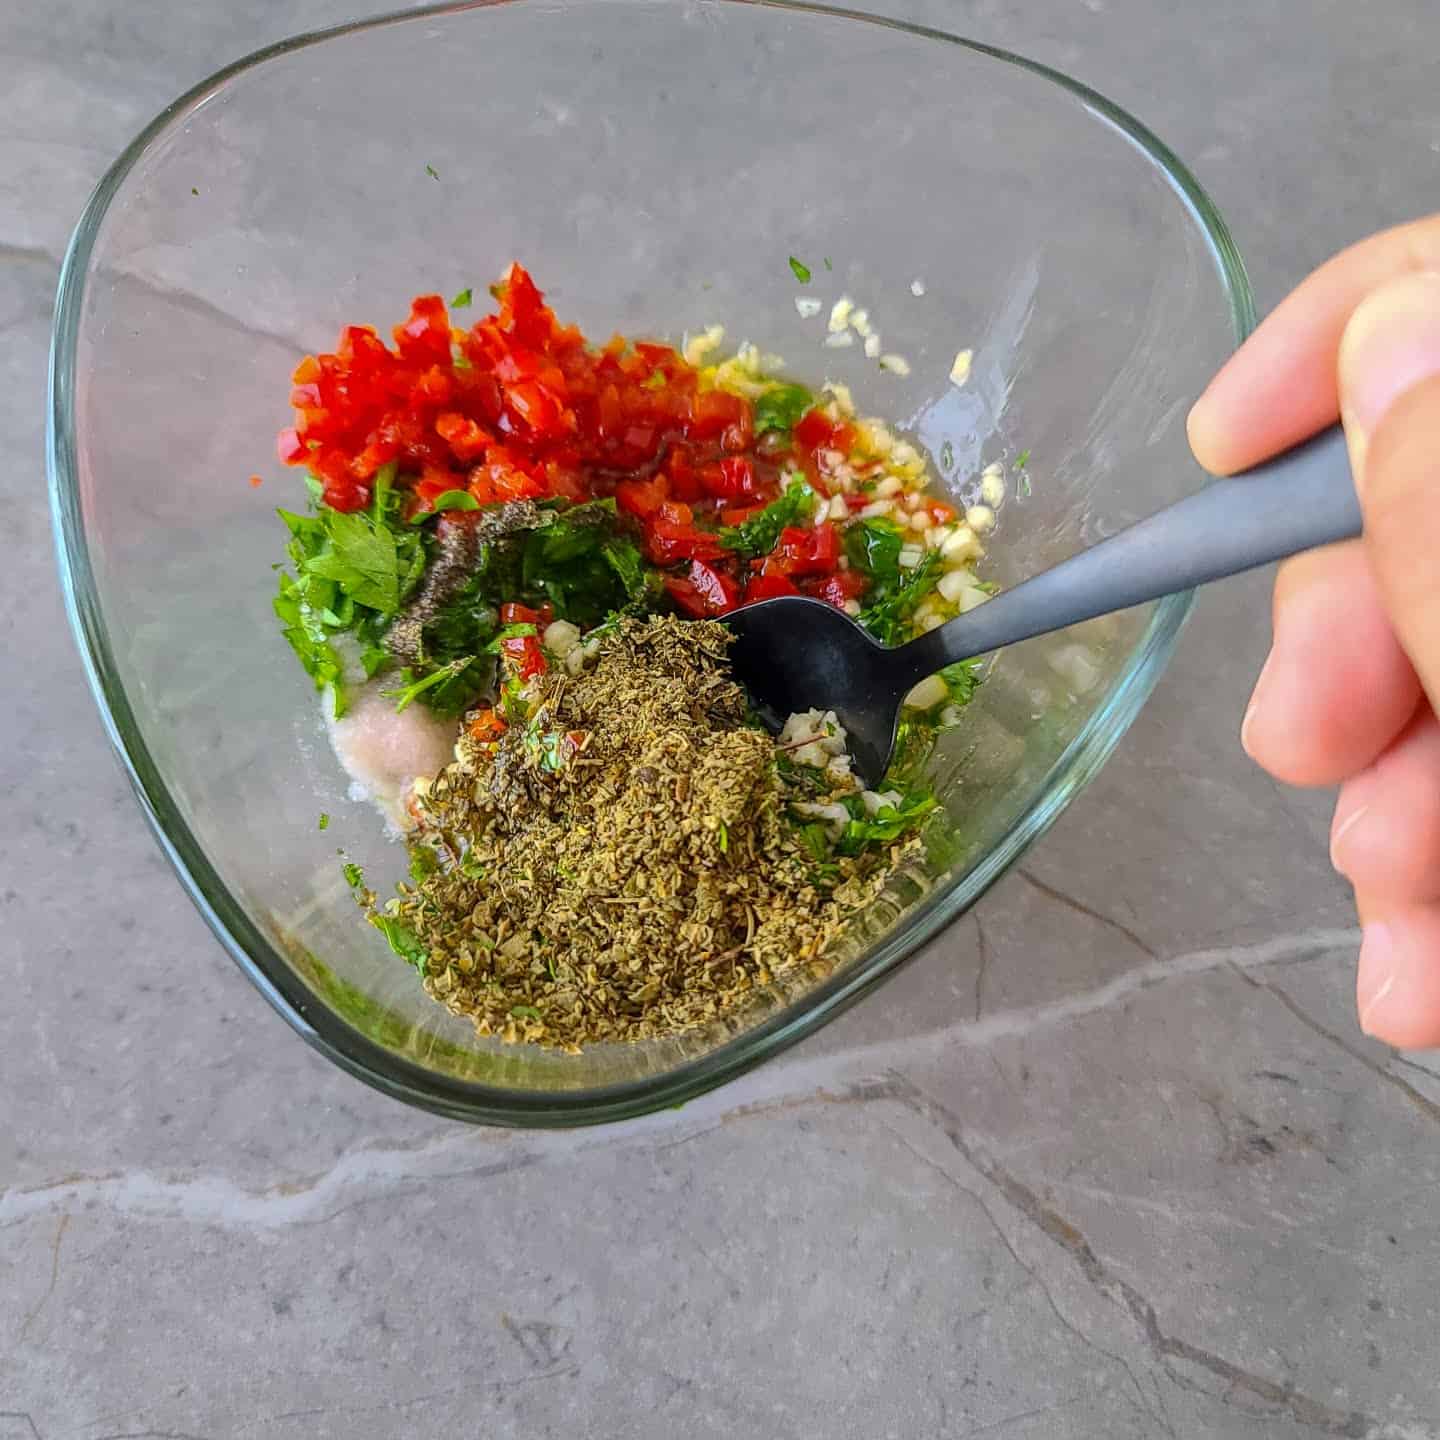 Combine all the ingredients in a small bowl.